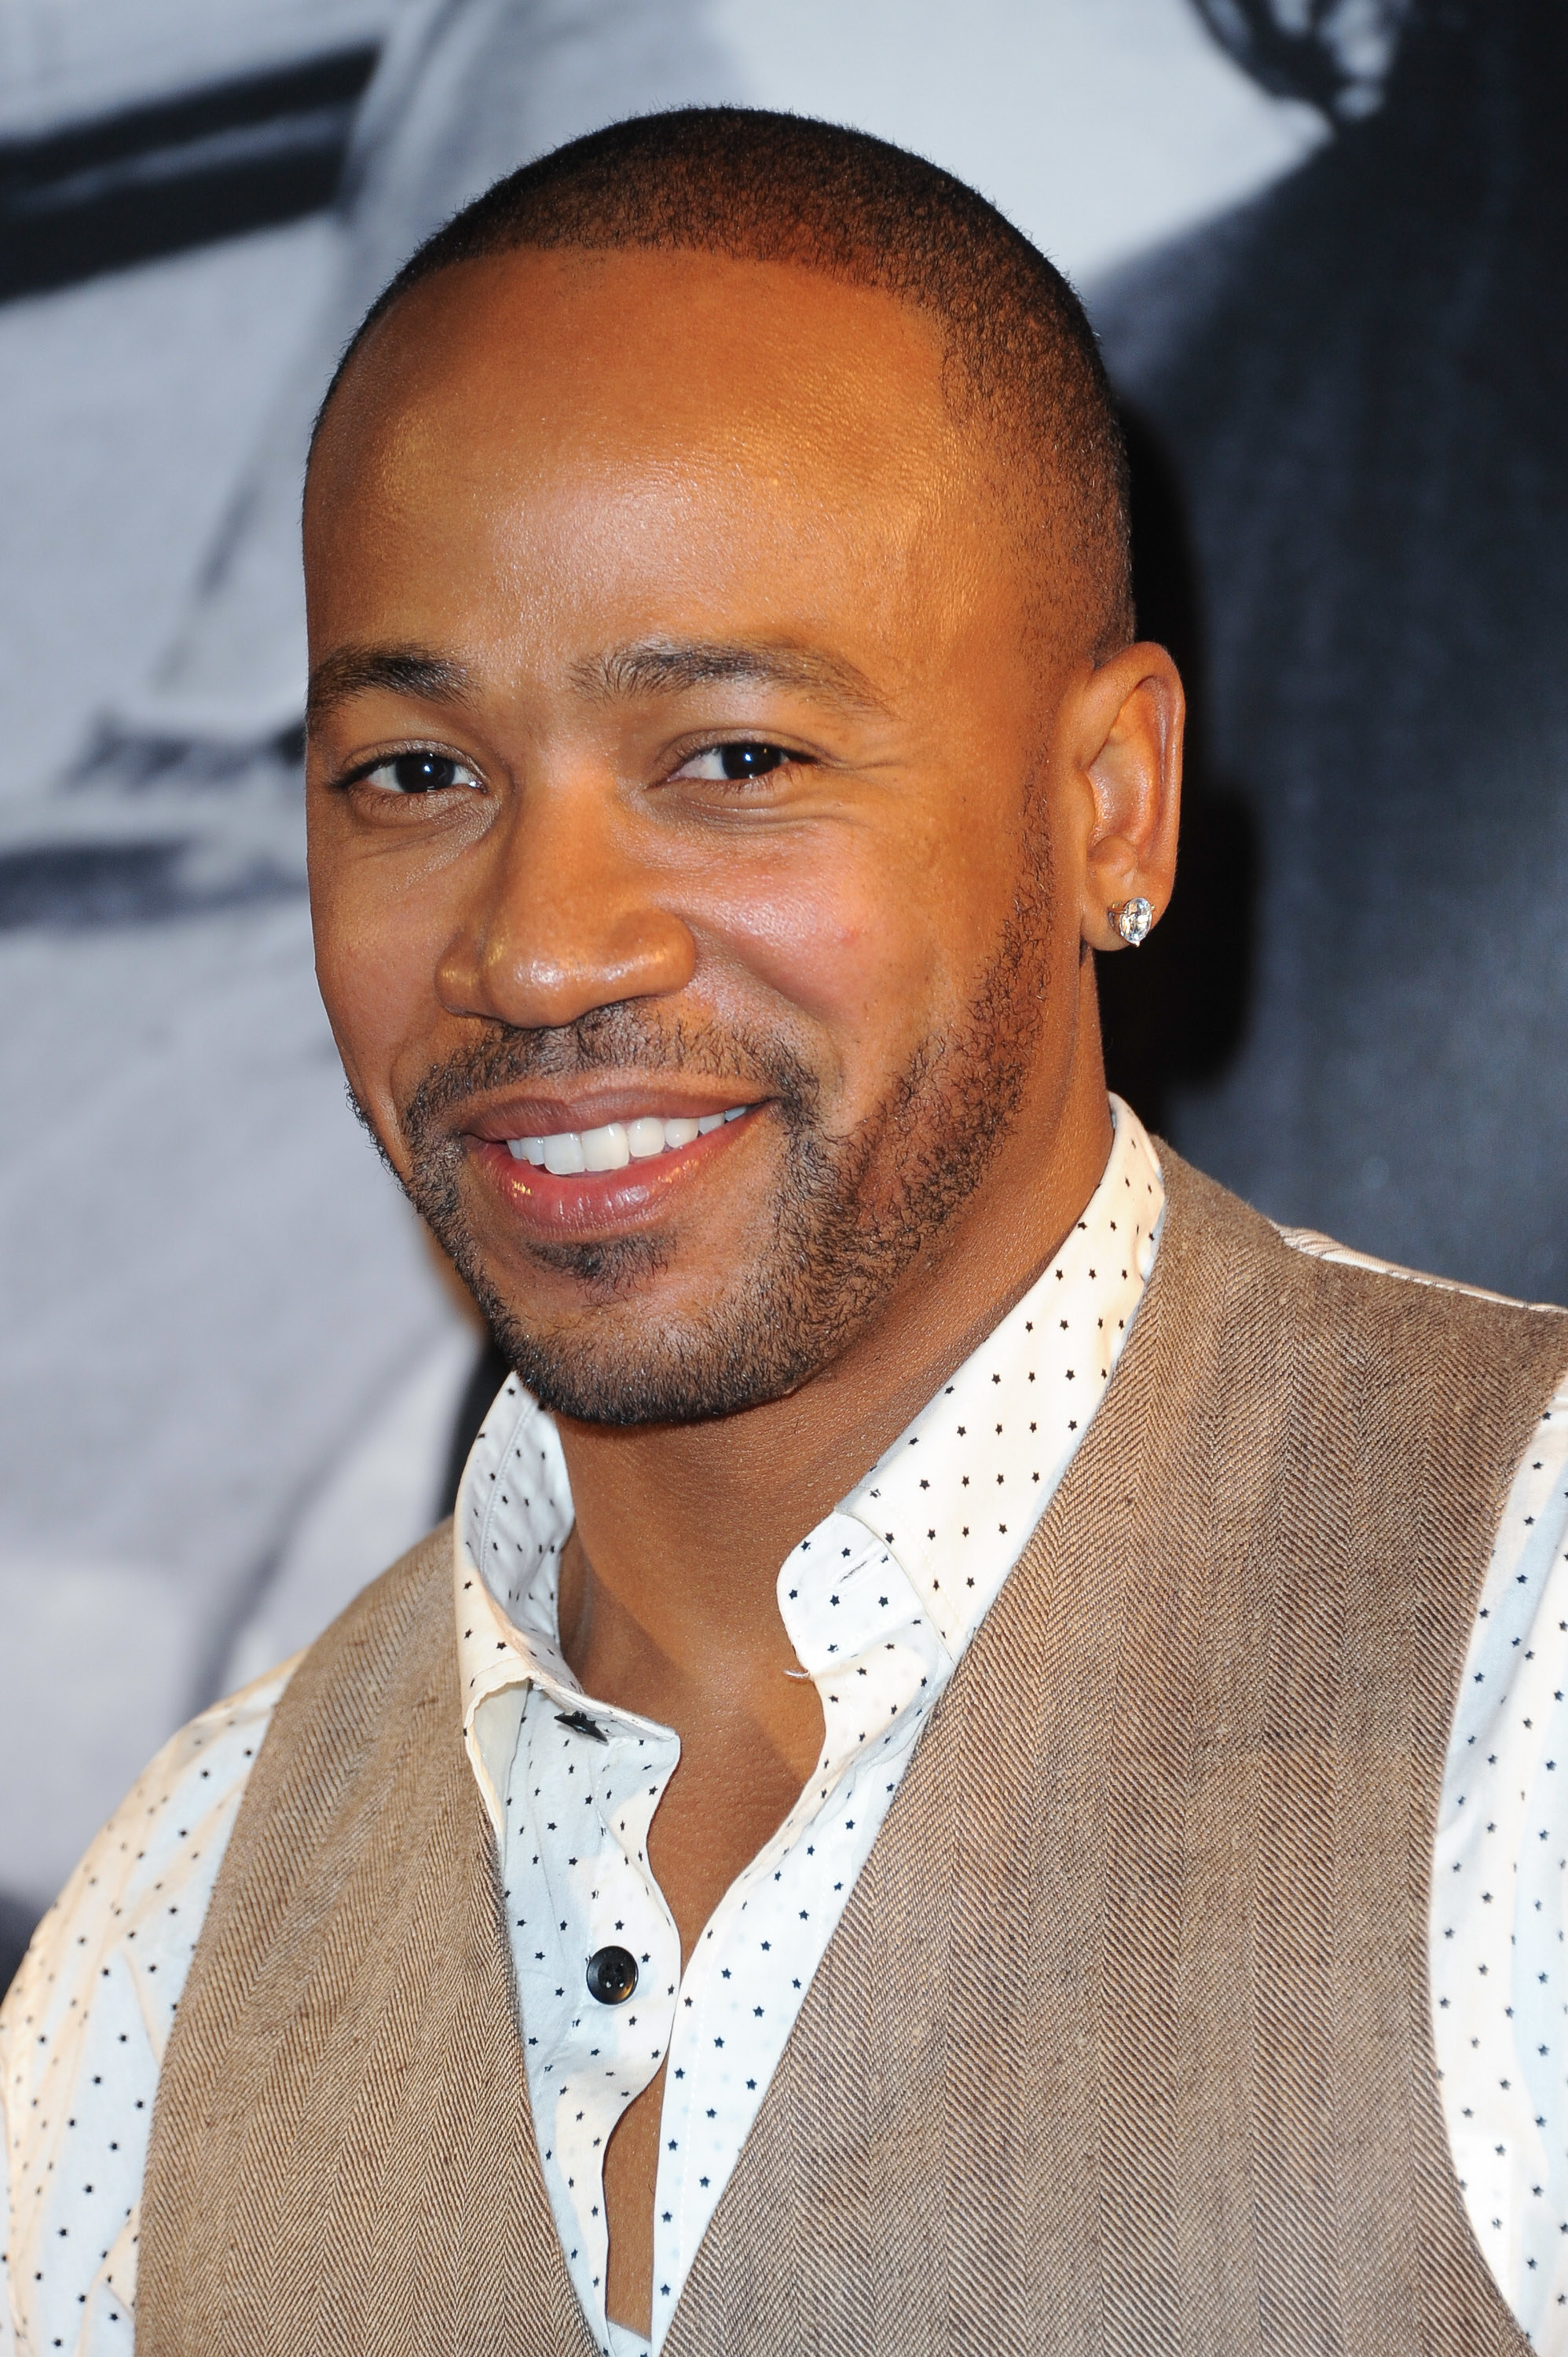 Columbus Short smiling and posing at an event